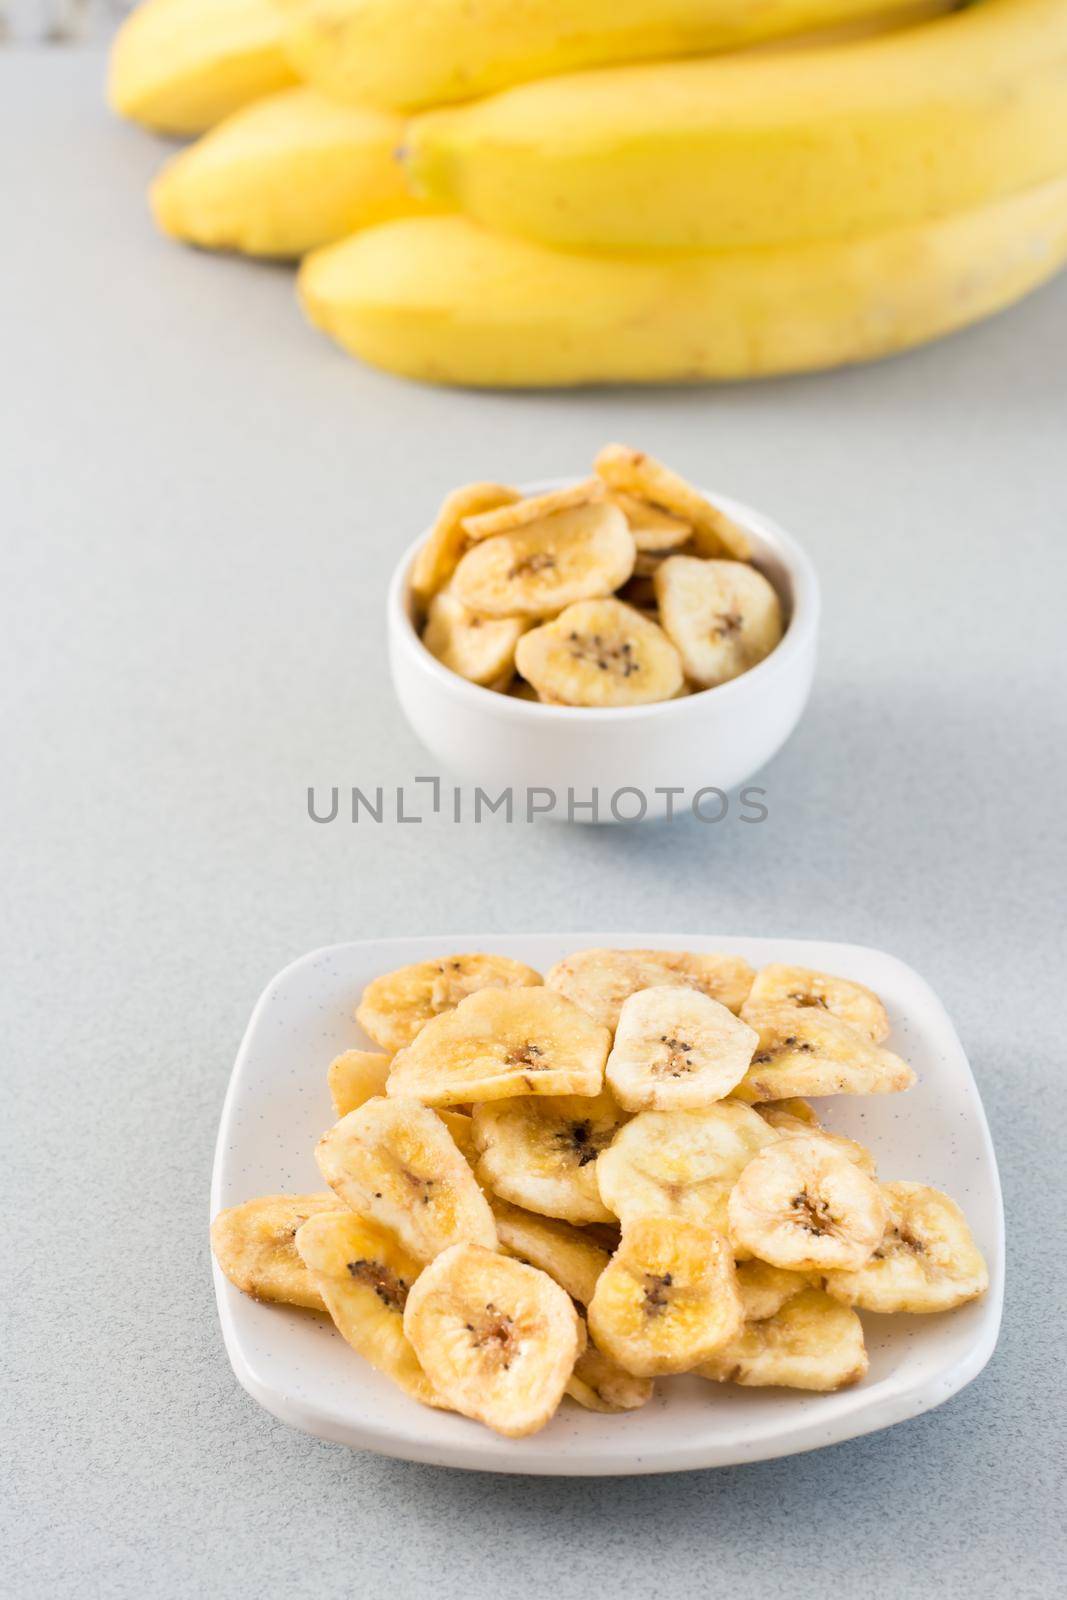 Baked banana chips in a white bowl and saucer and a bunch of bananas on the table. Fast food. Vertical view by Aleruana